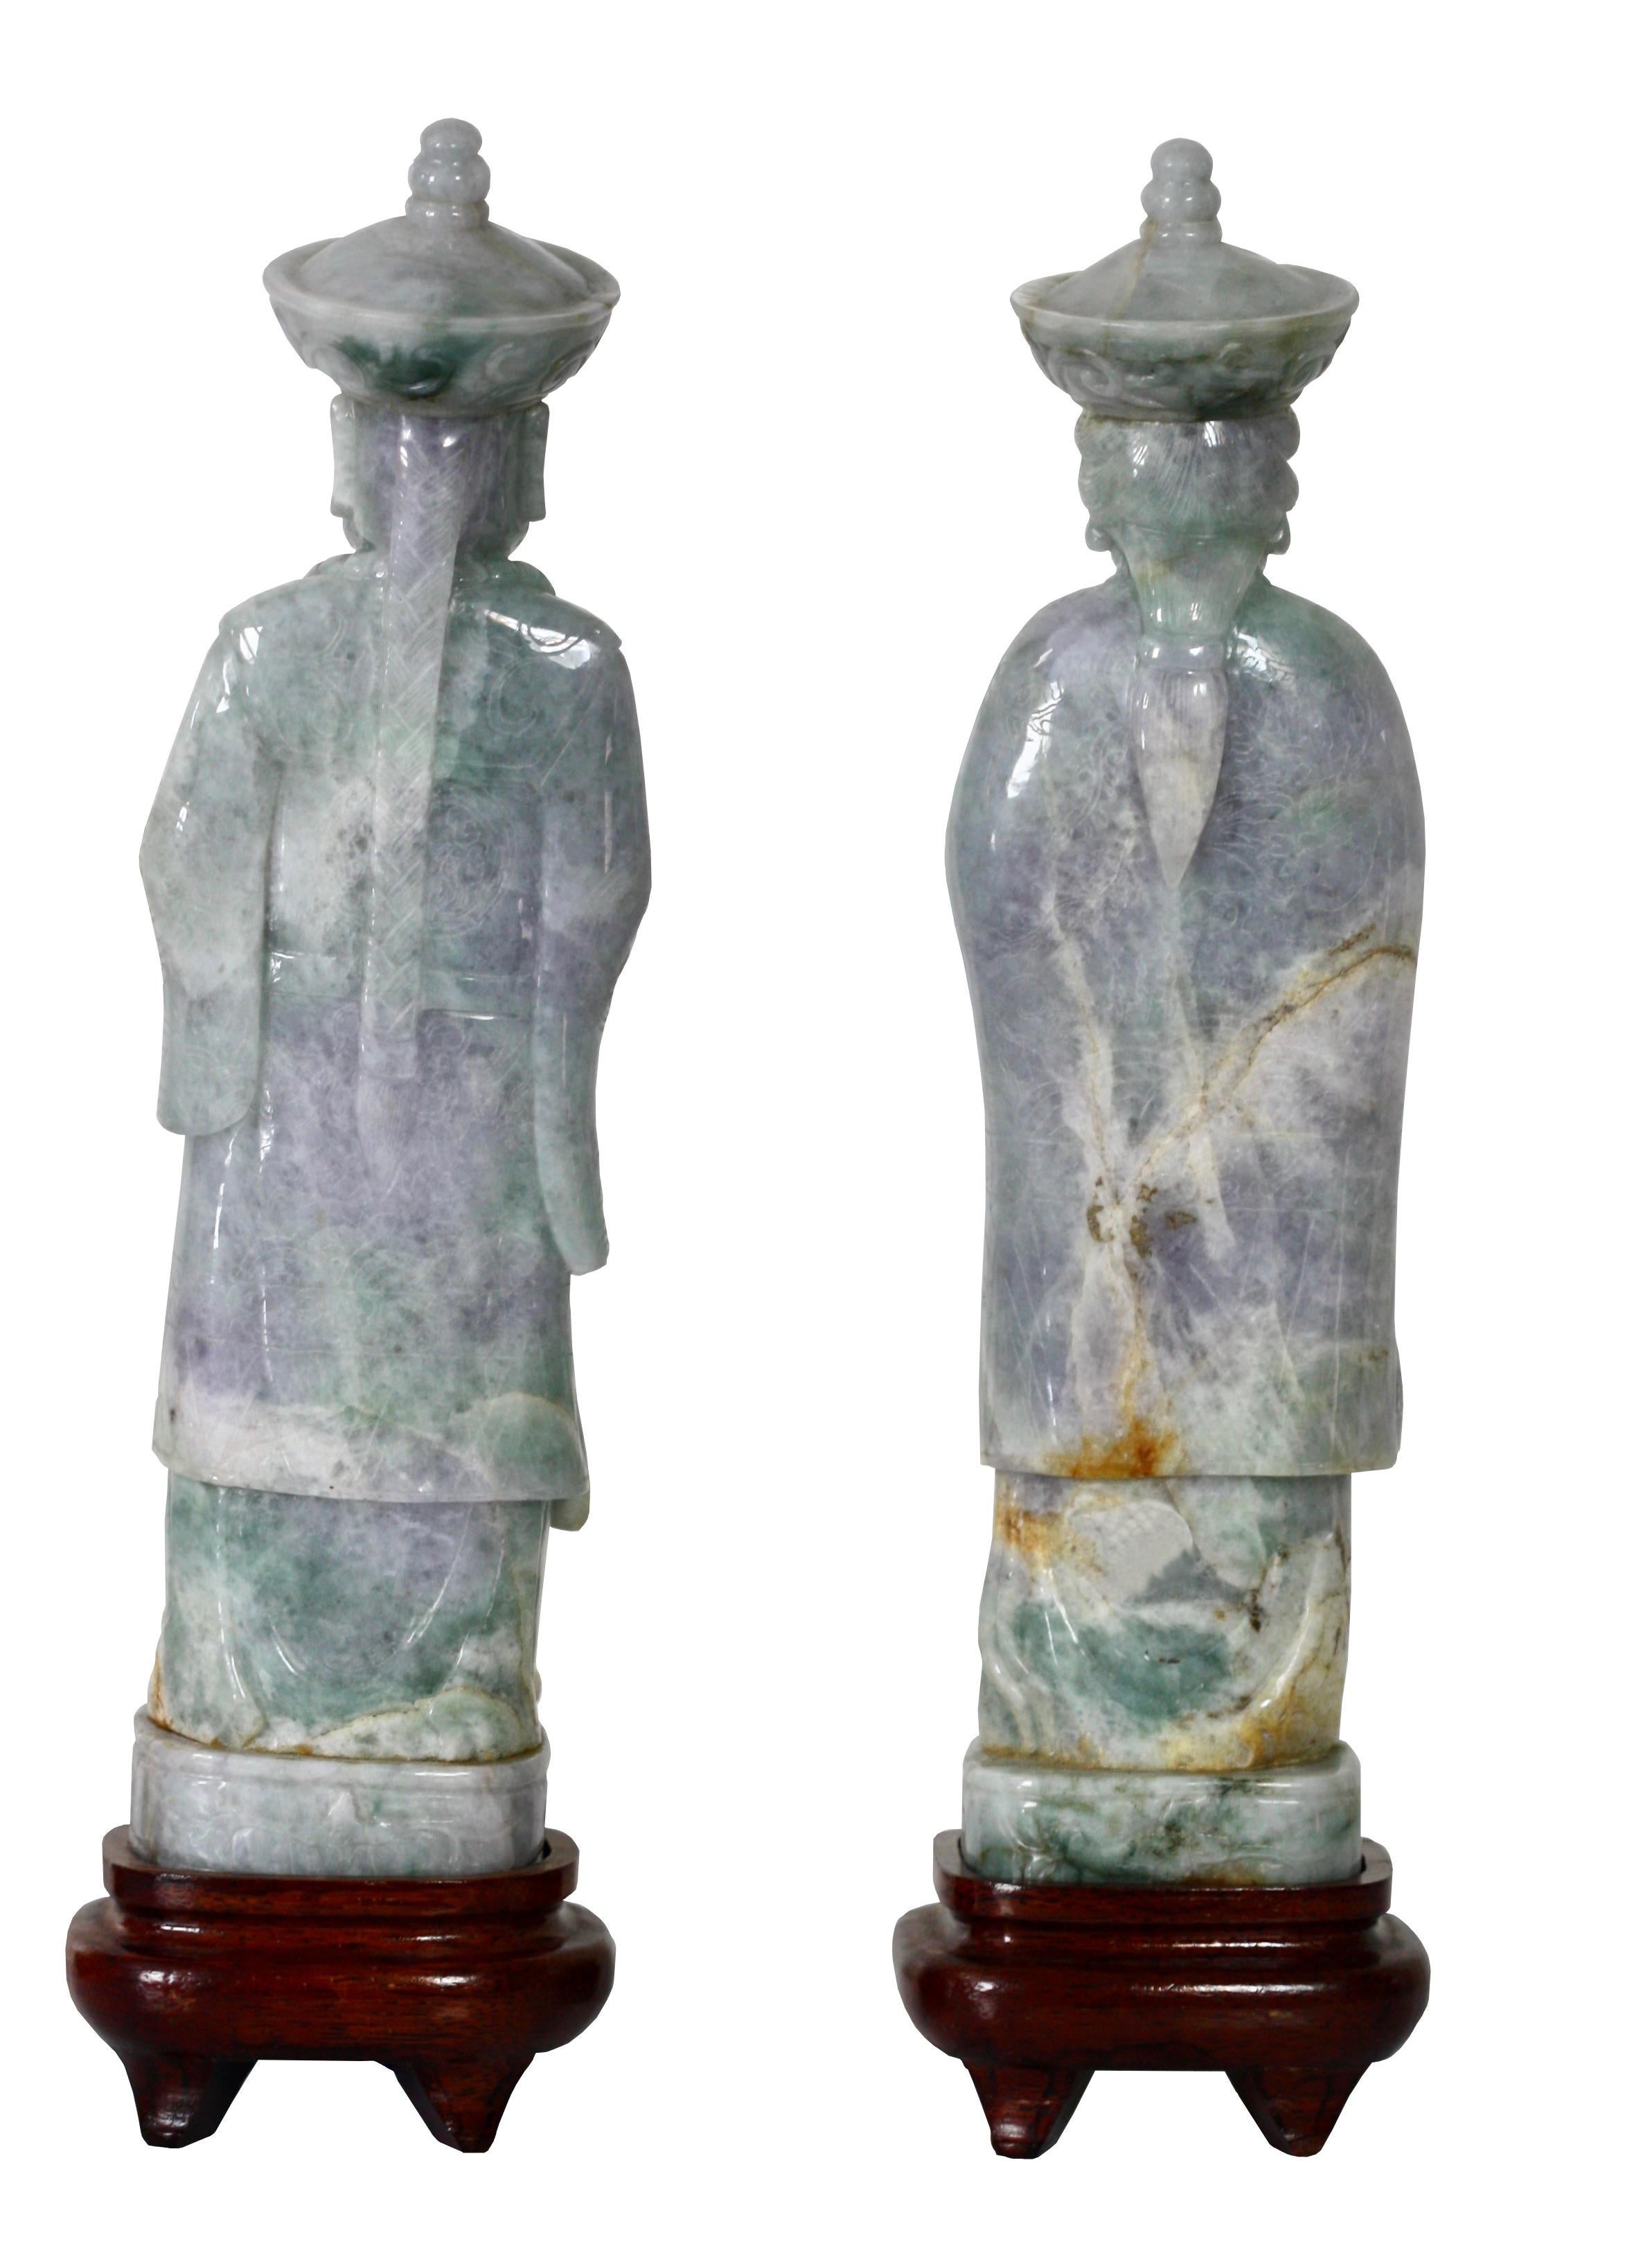 Pair of light lavender Jade Figures of a Queen and King 
20TH CENTURY
Carved as a standing queen dressed in lavish traditional attire and adorned with elaborate jewelry her face rendered with a gentle smile; and a figure of a king standing on a